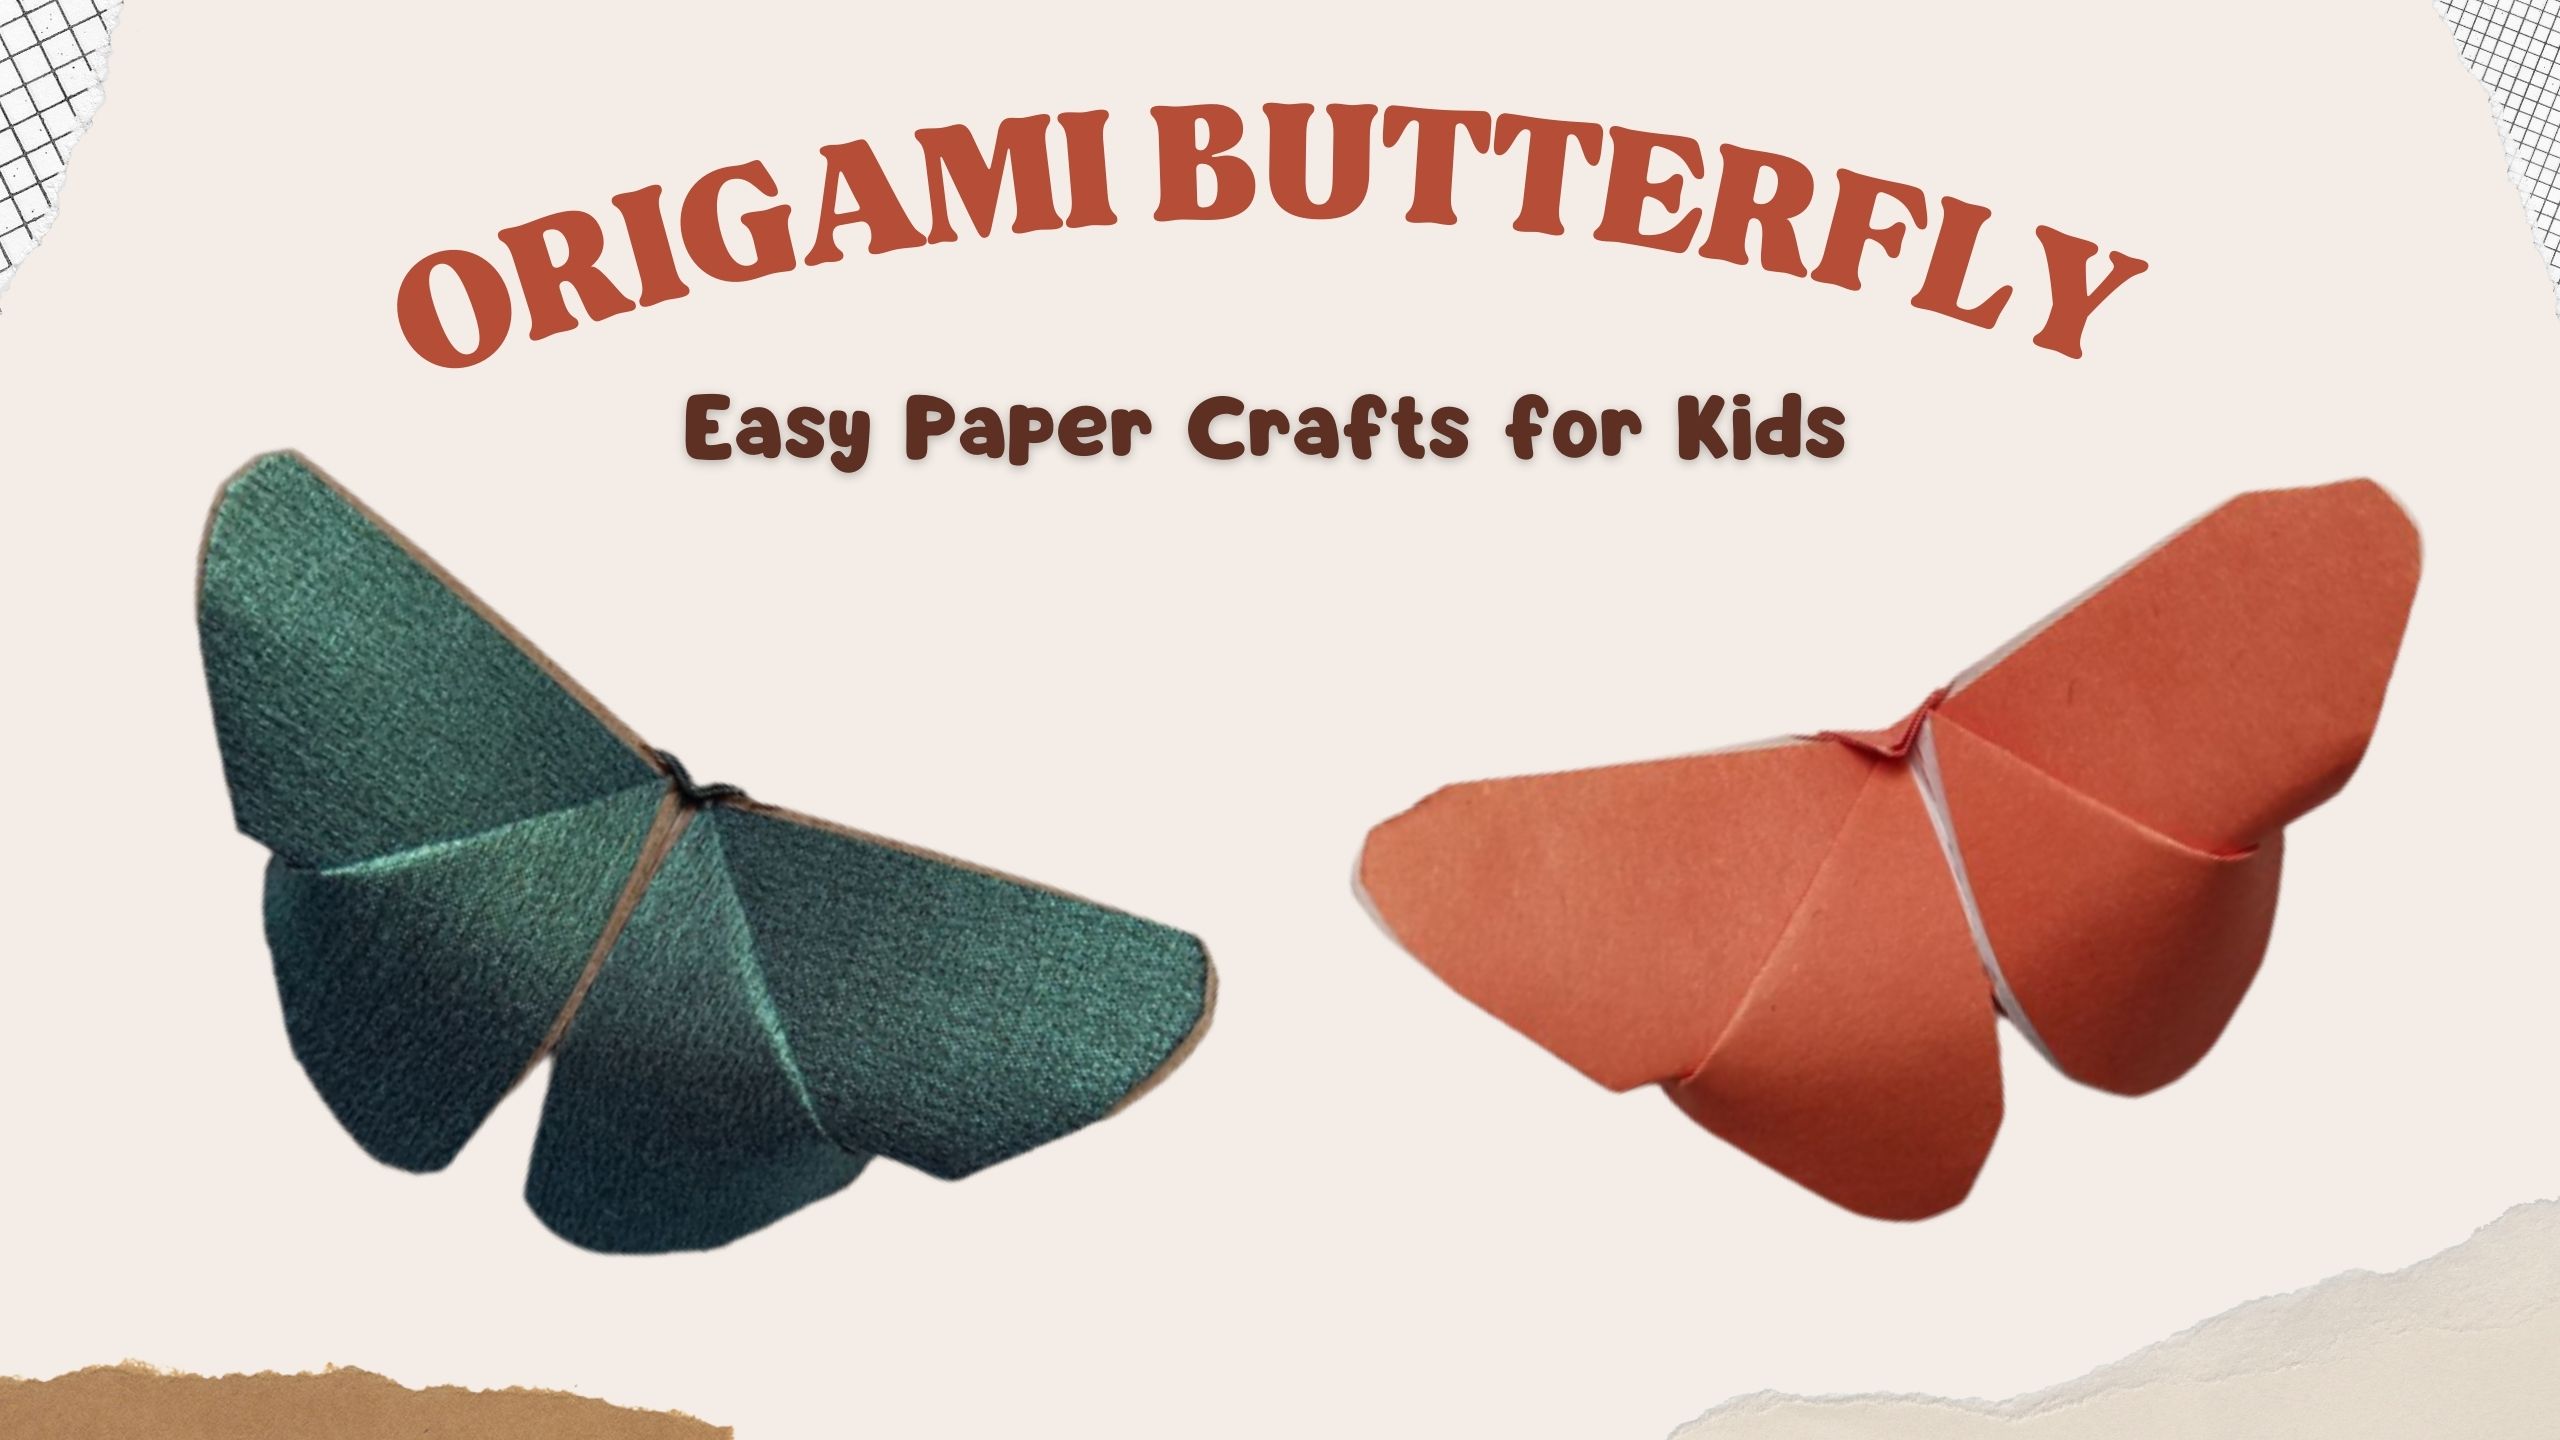 How to make Origami paper butterflies, Easy craft